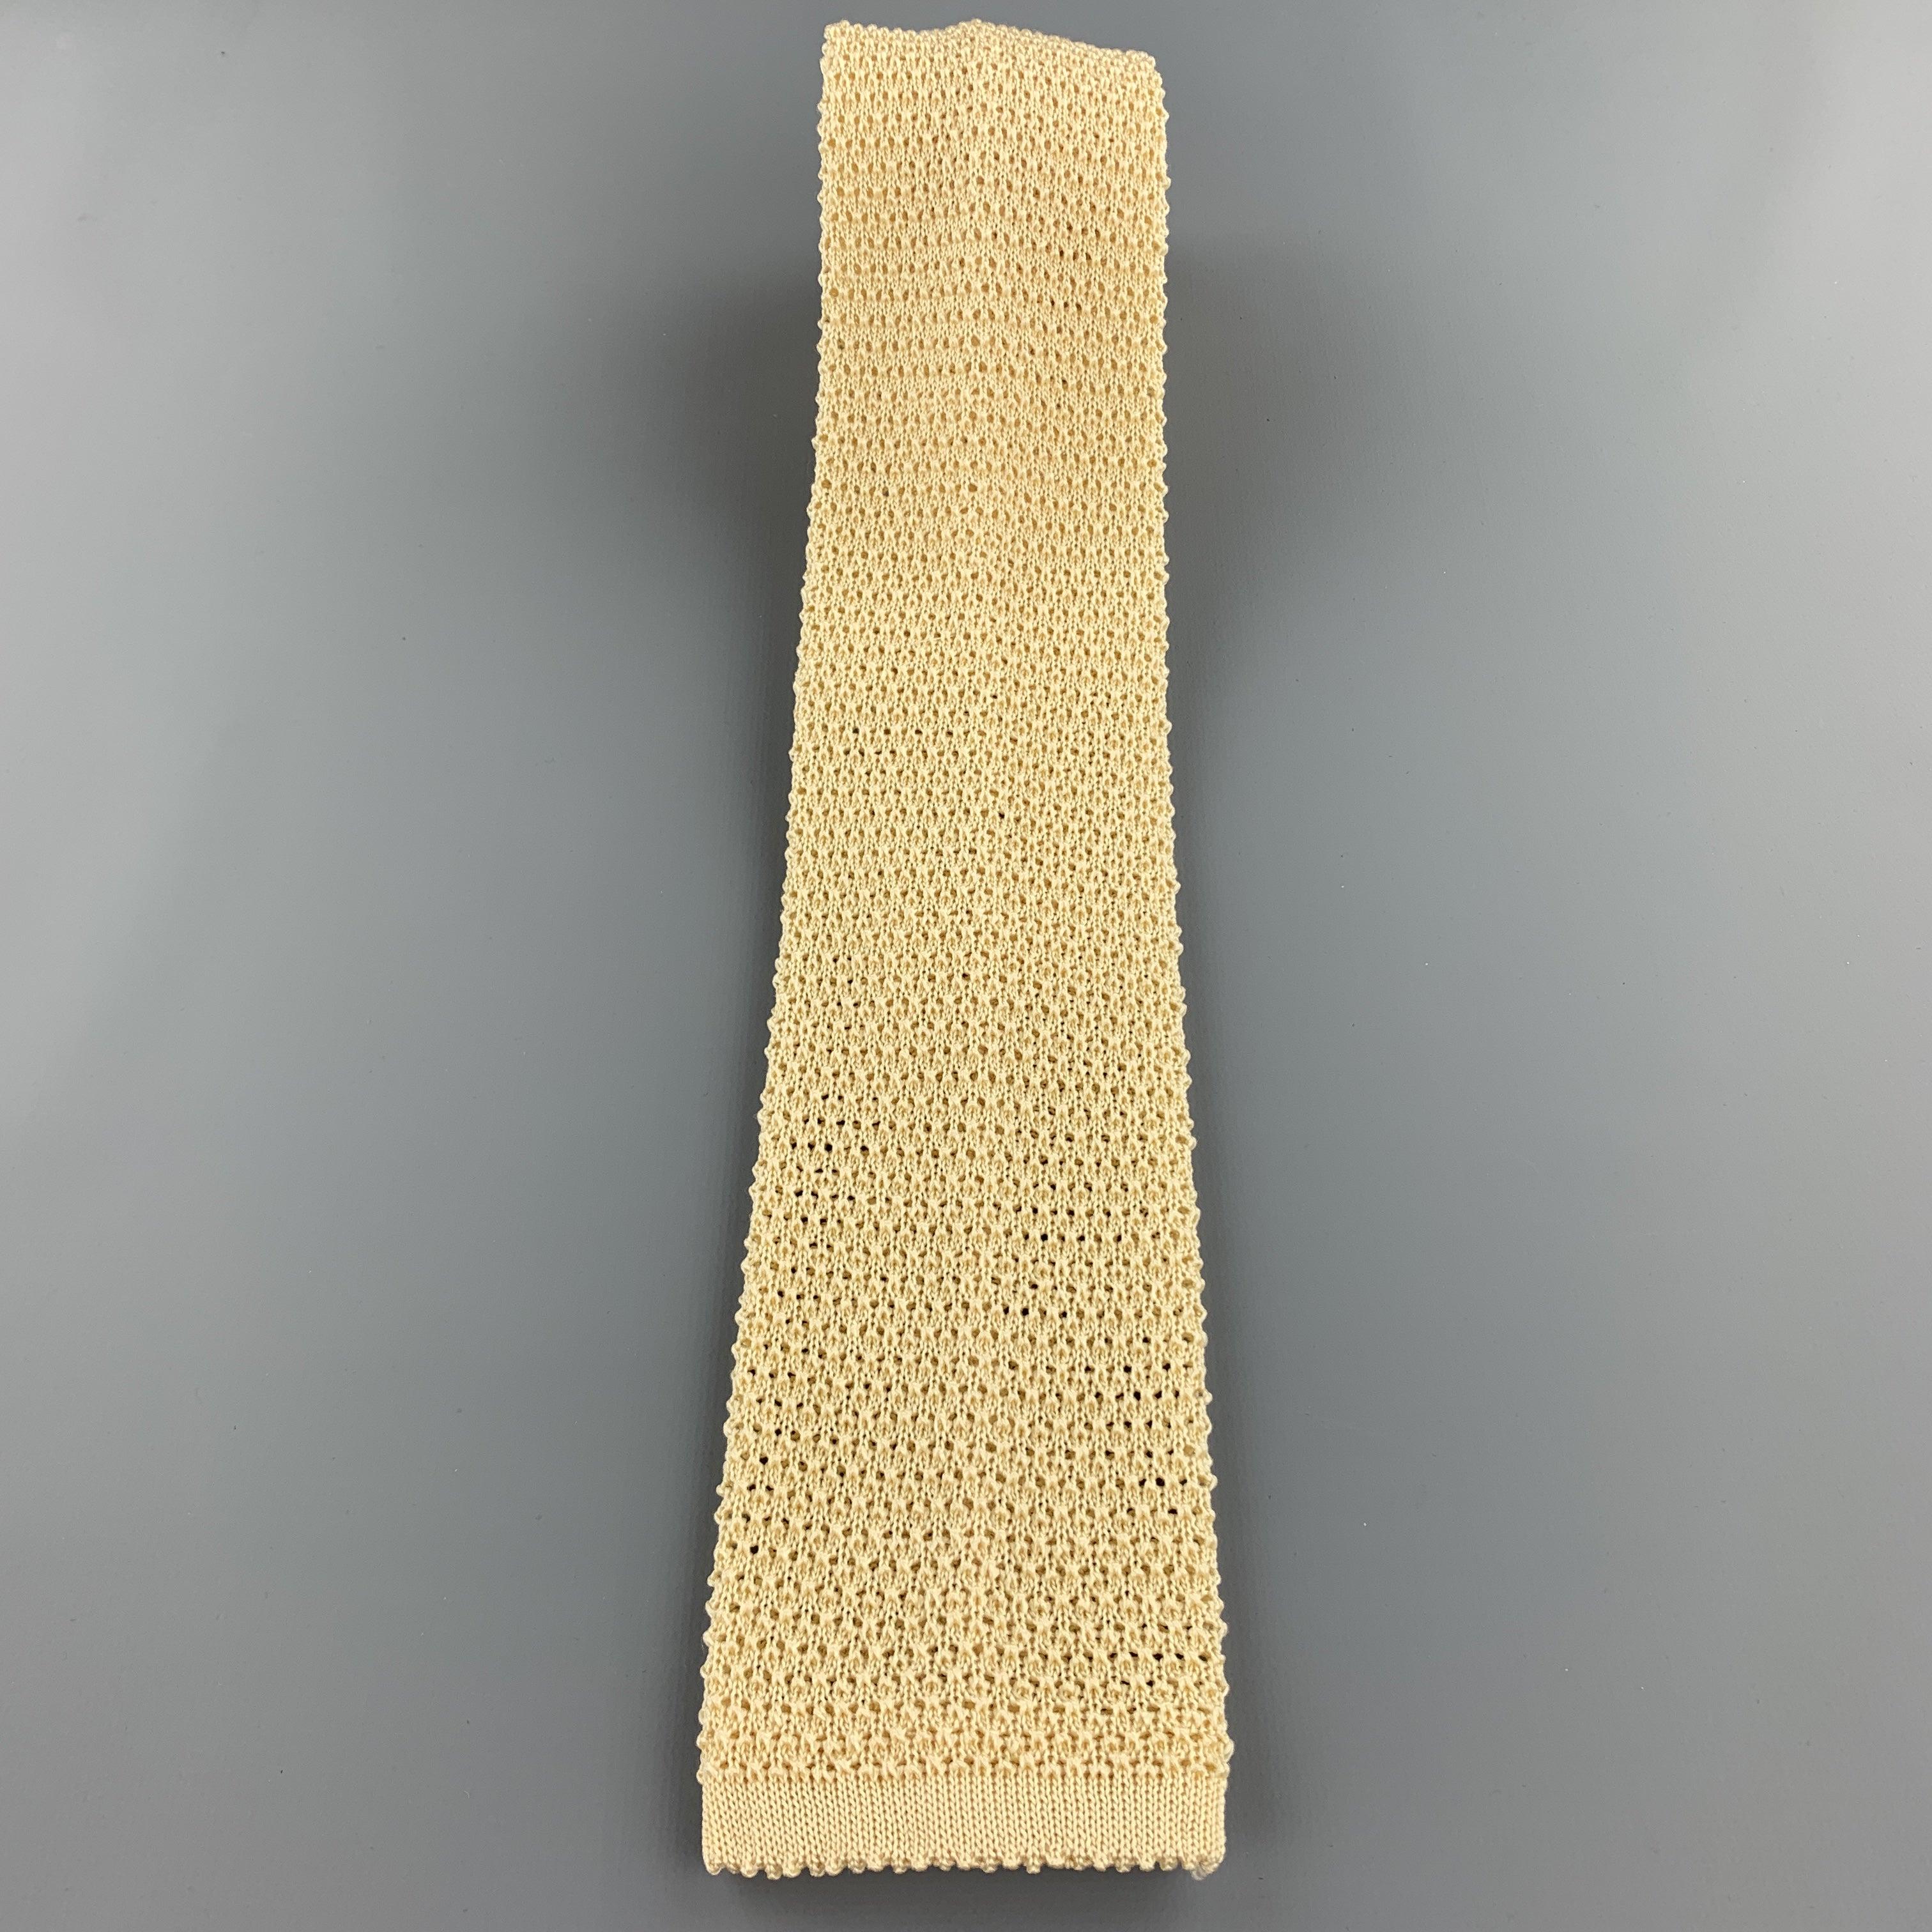 TURNBULL & ASSER Yellow Pastel Silk Textured Knit Tie In Excellent Condition For Sale In San Francisco, CA